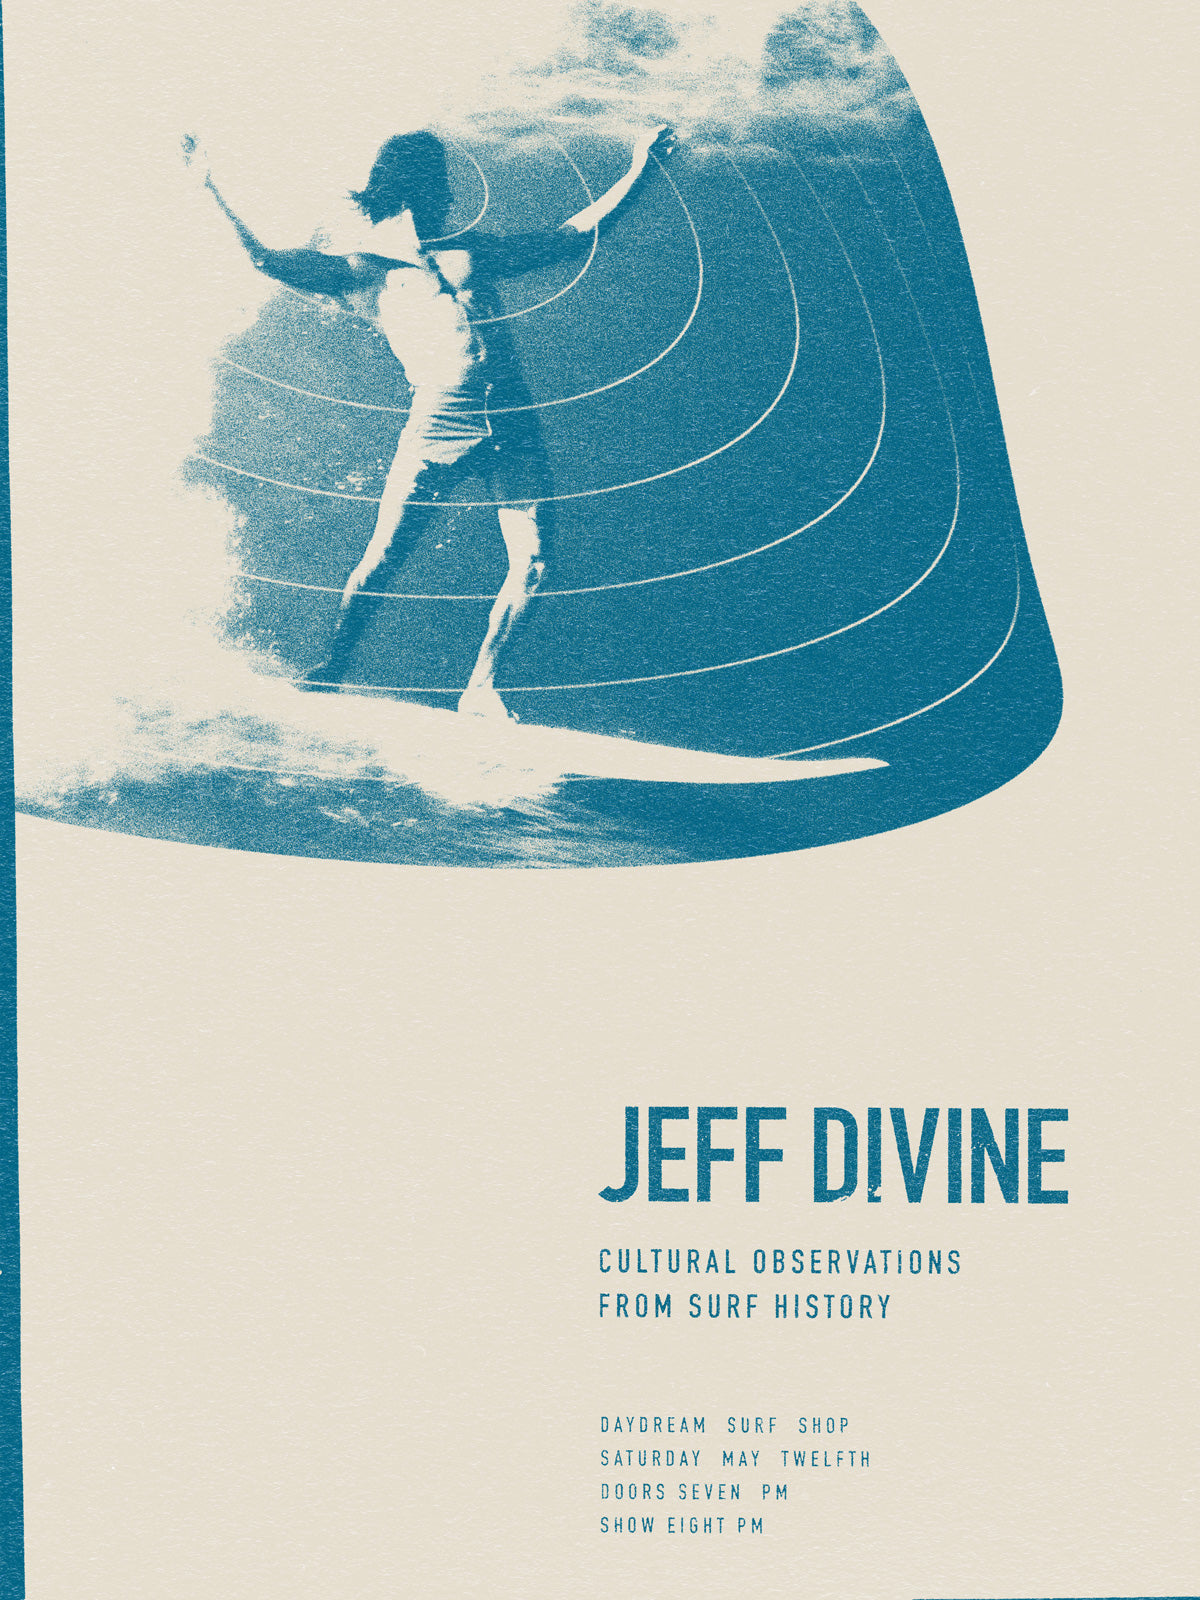 Jeff Divine: Cultural Observations From Surf History